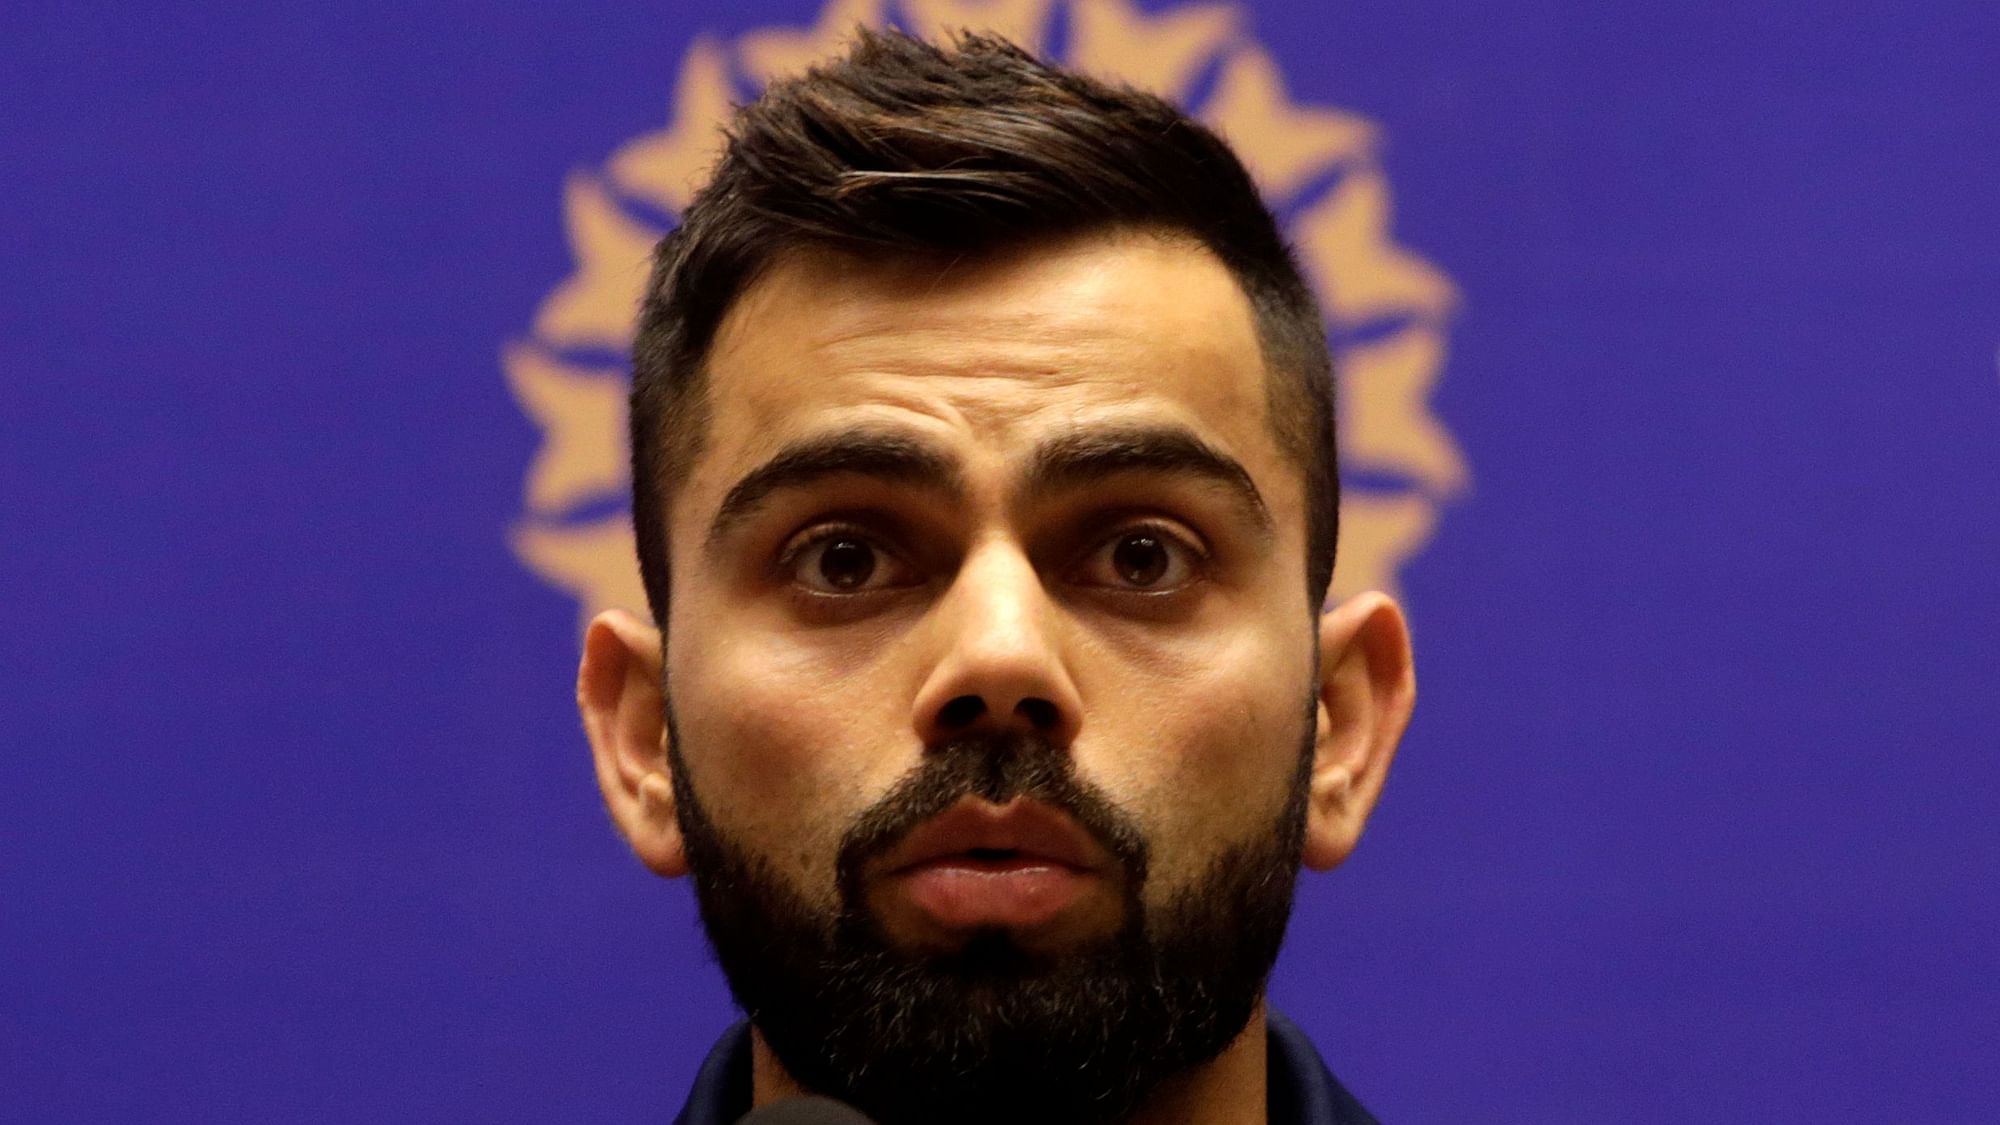 <div class="paragraphs"><p>Virat Kohli announced his decision to step down an Indian T20 captain after the T20 World Cup later this year.</p></div>